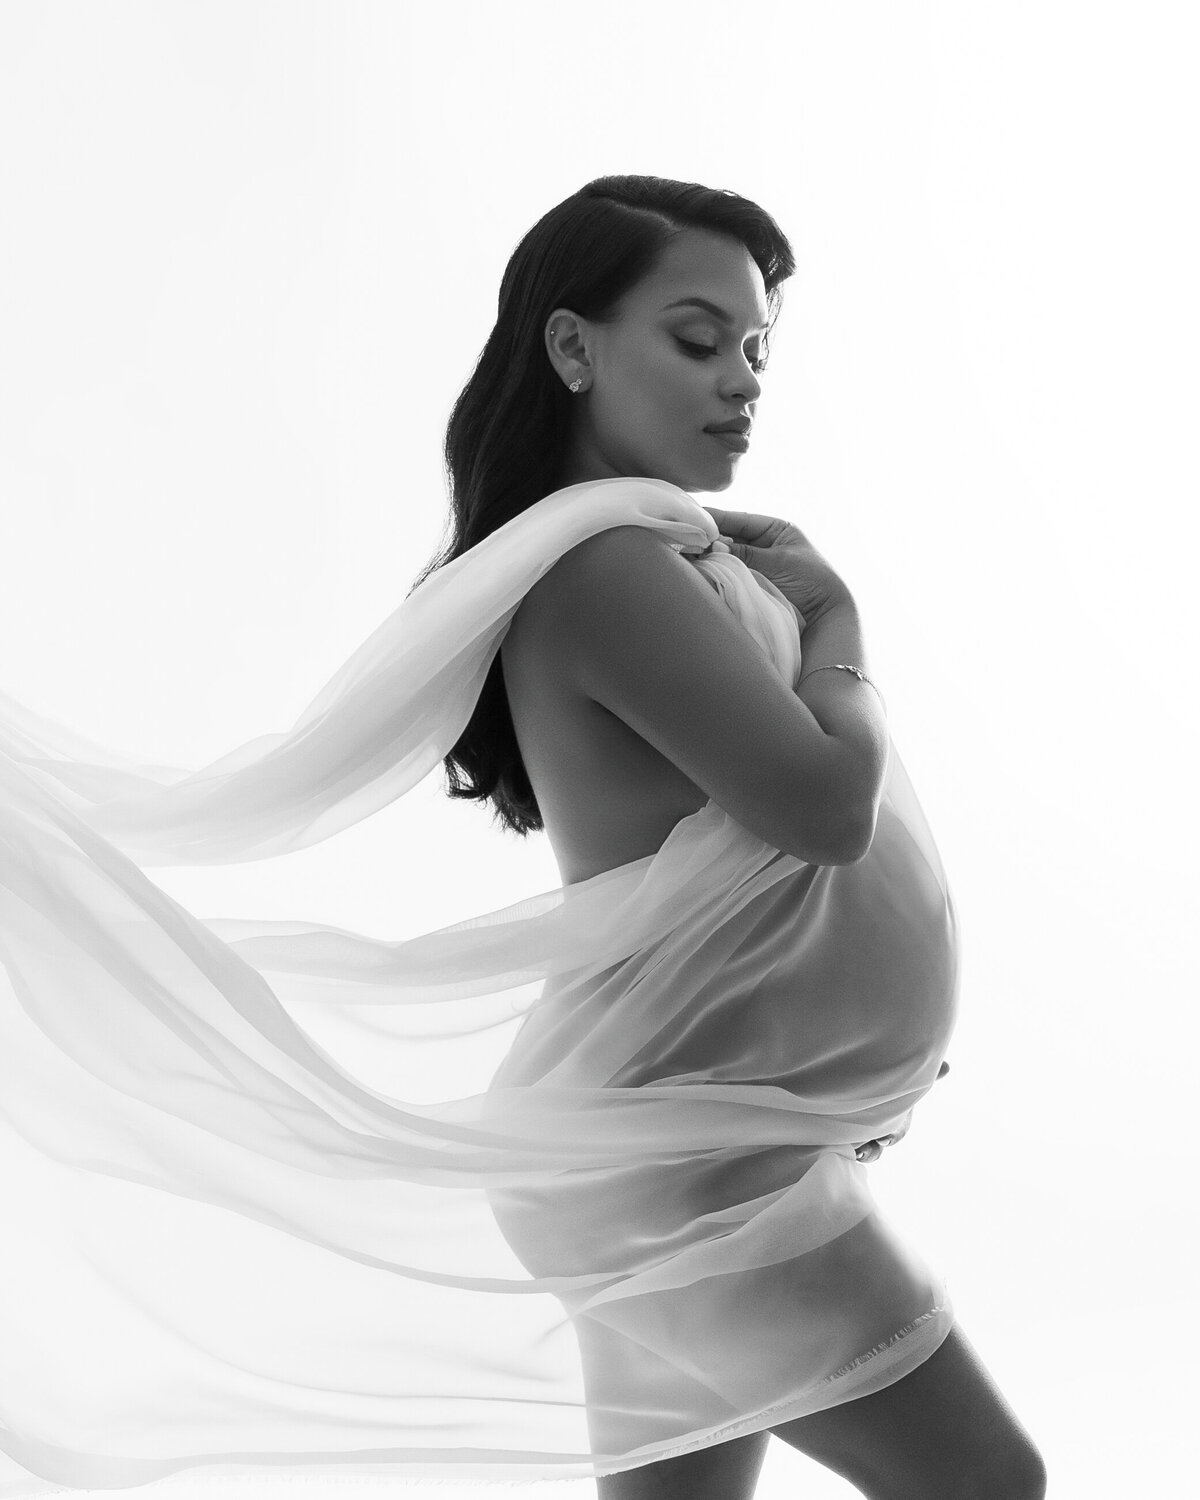 Timeless and elegant maternity session by Daisy Rey